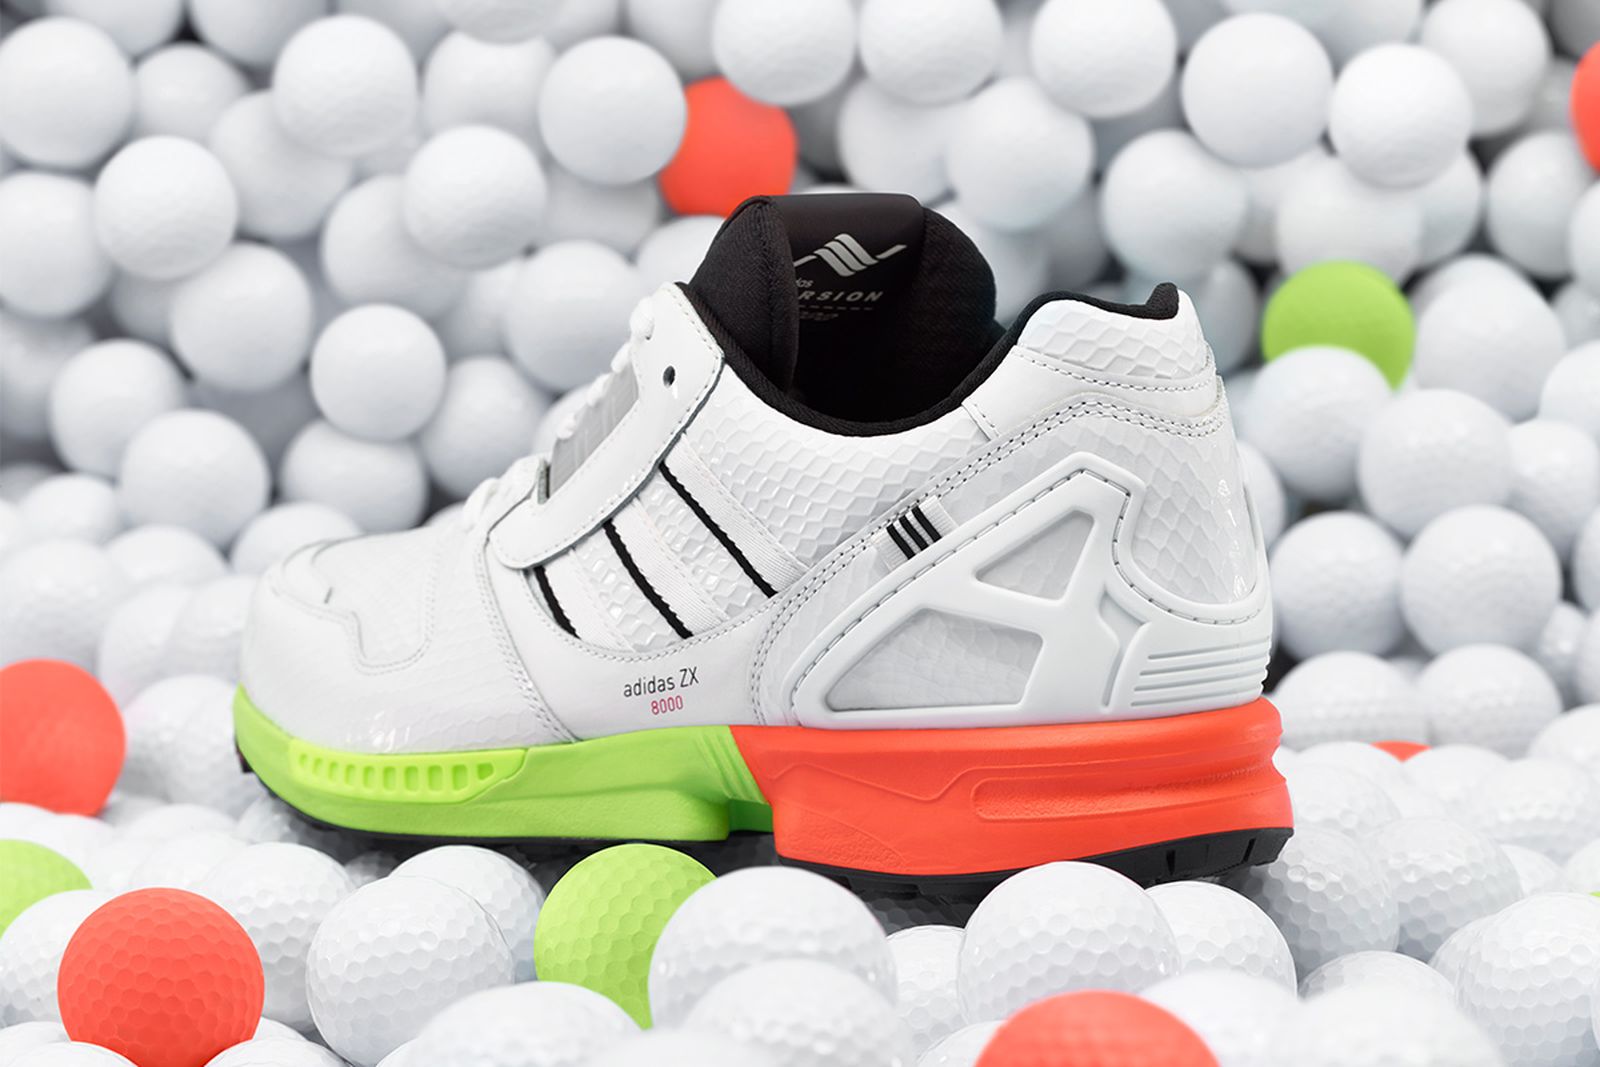 adidas-zx-8000-golf-release-date-price-03